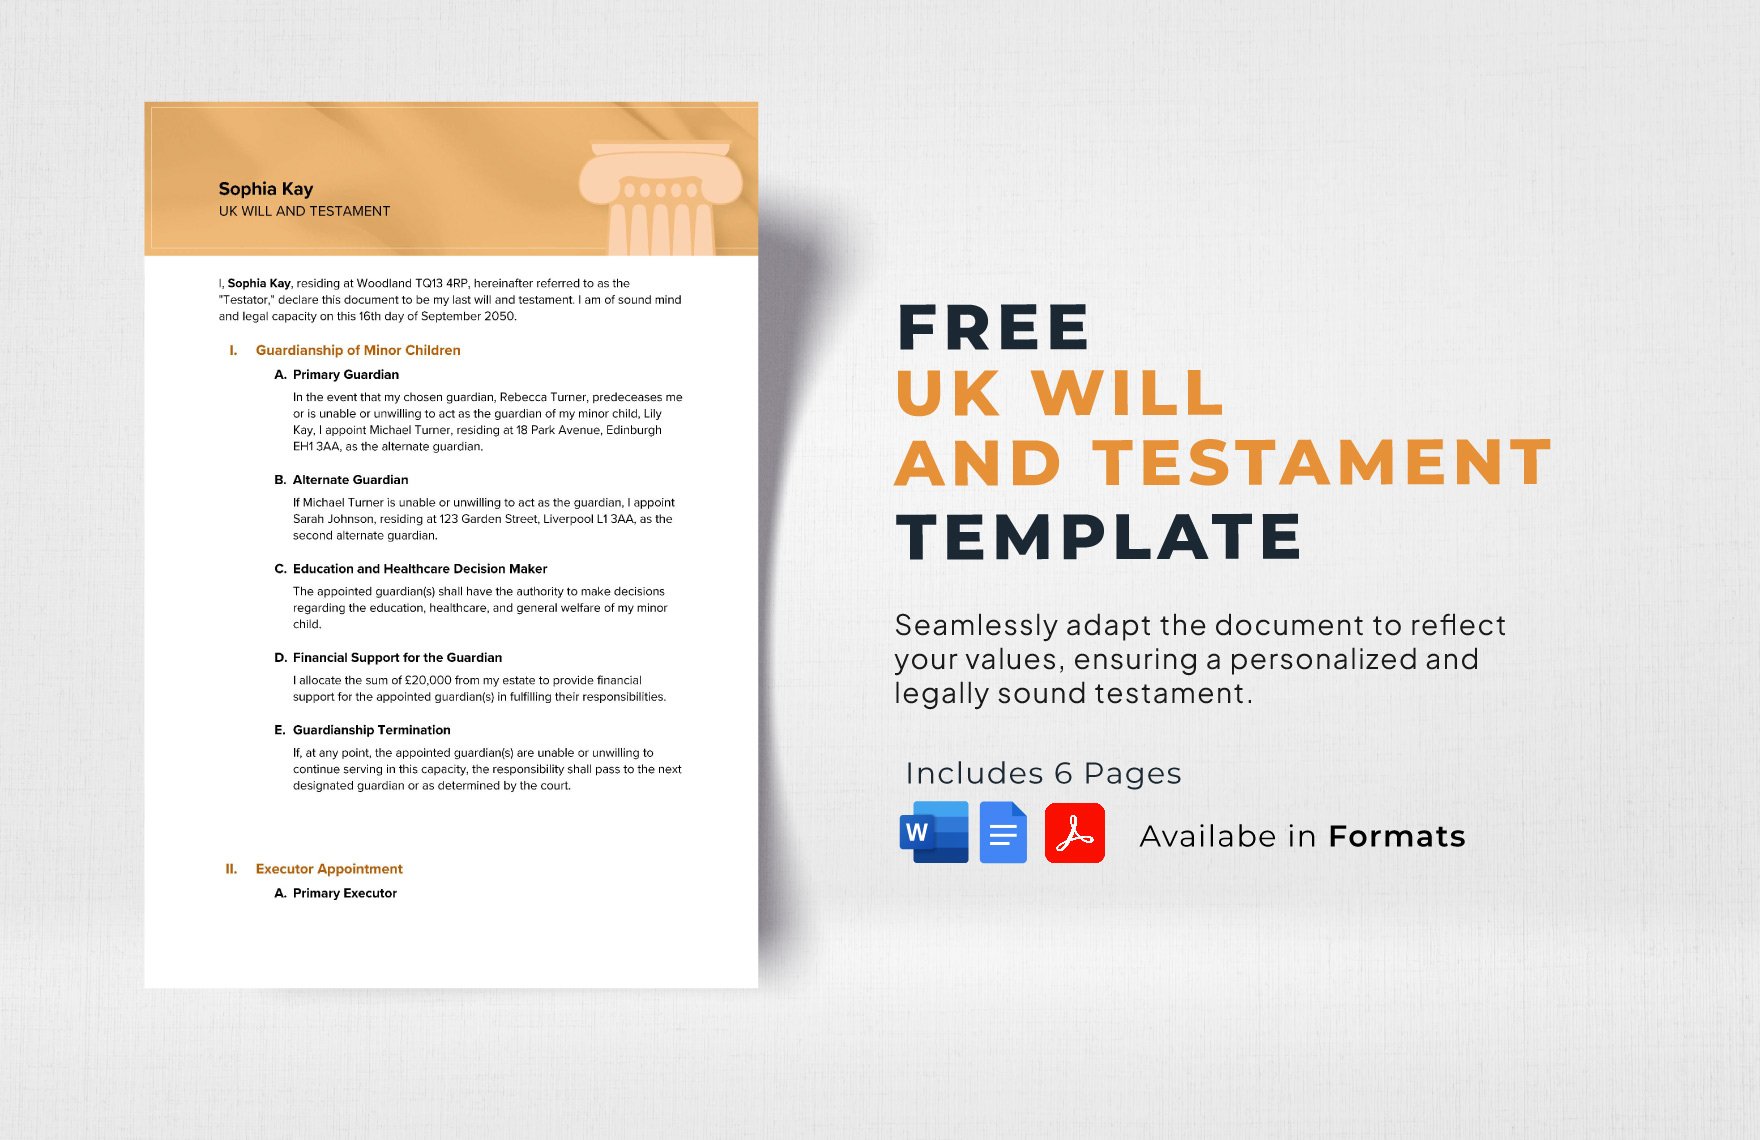 UK Will and Testament Template